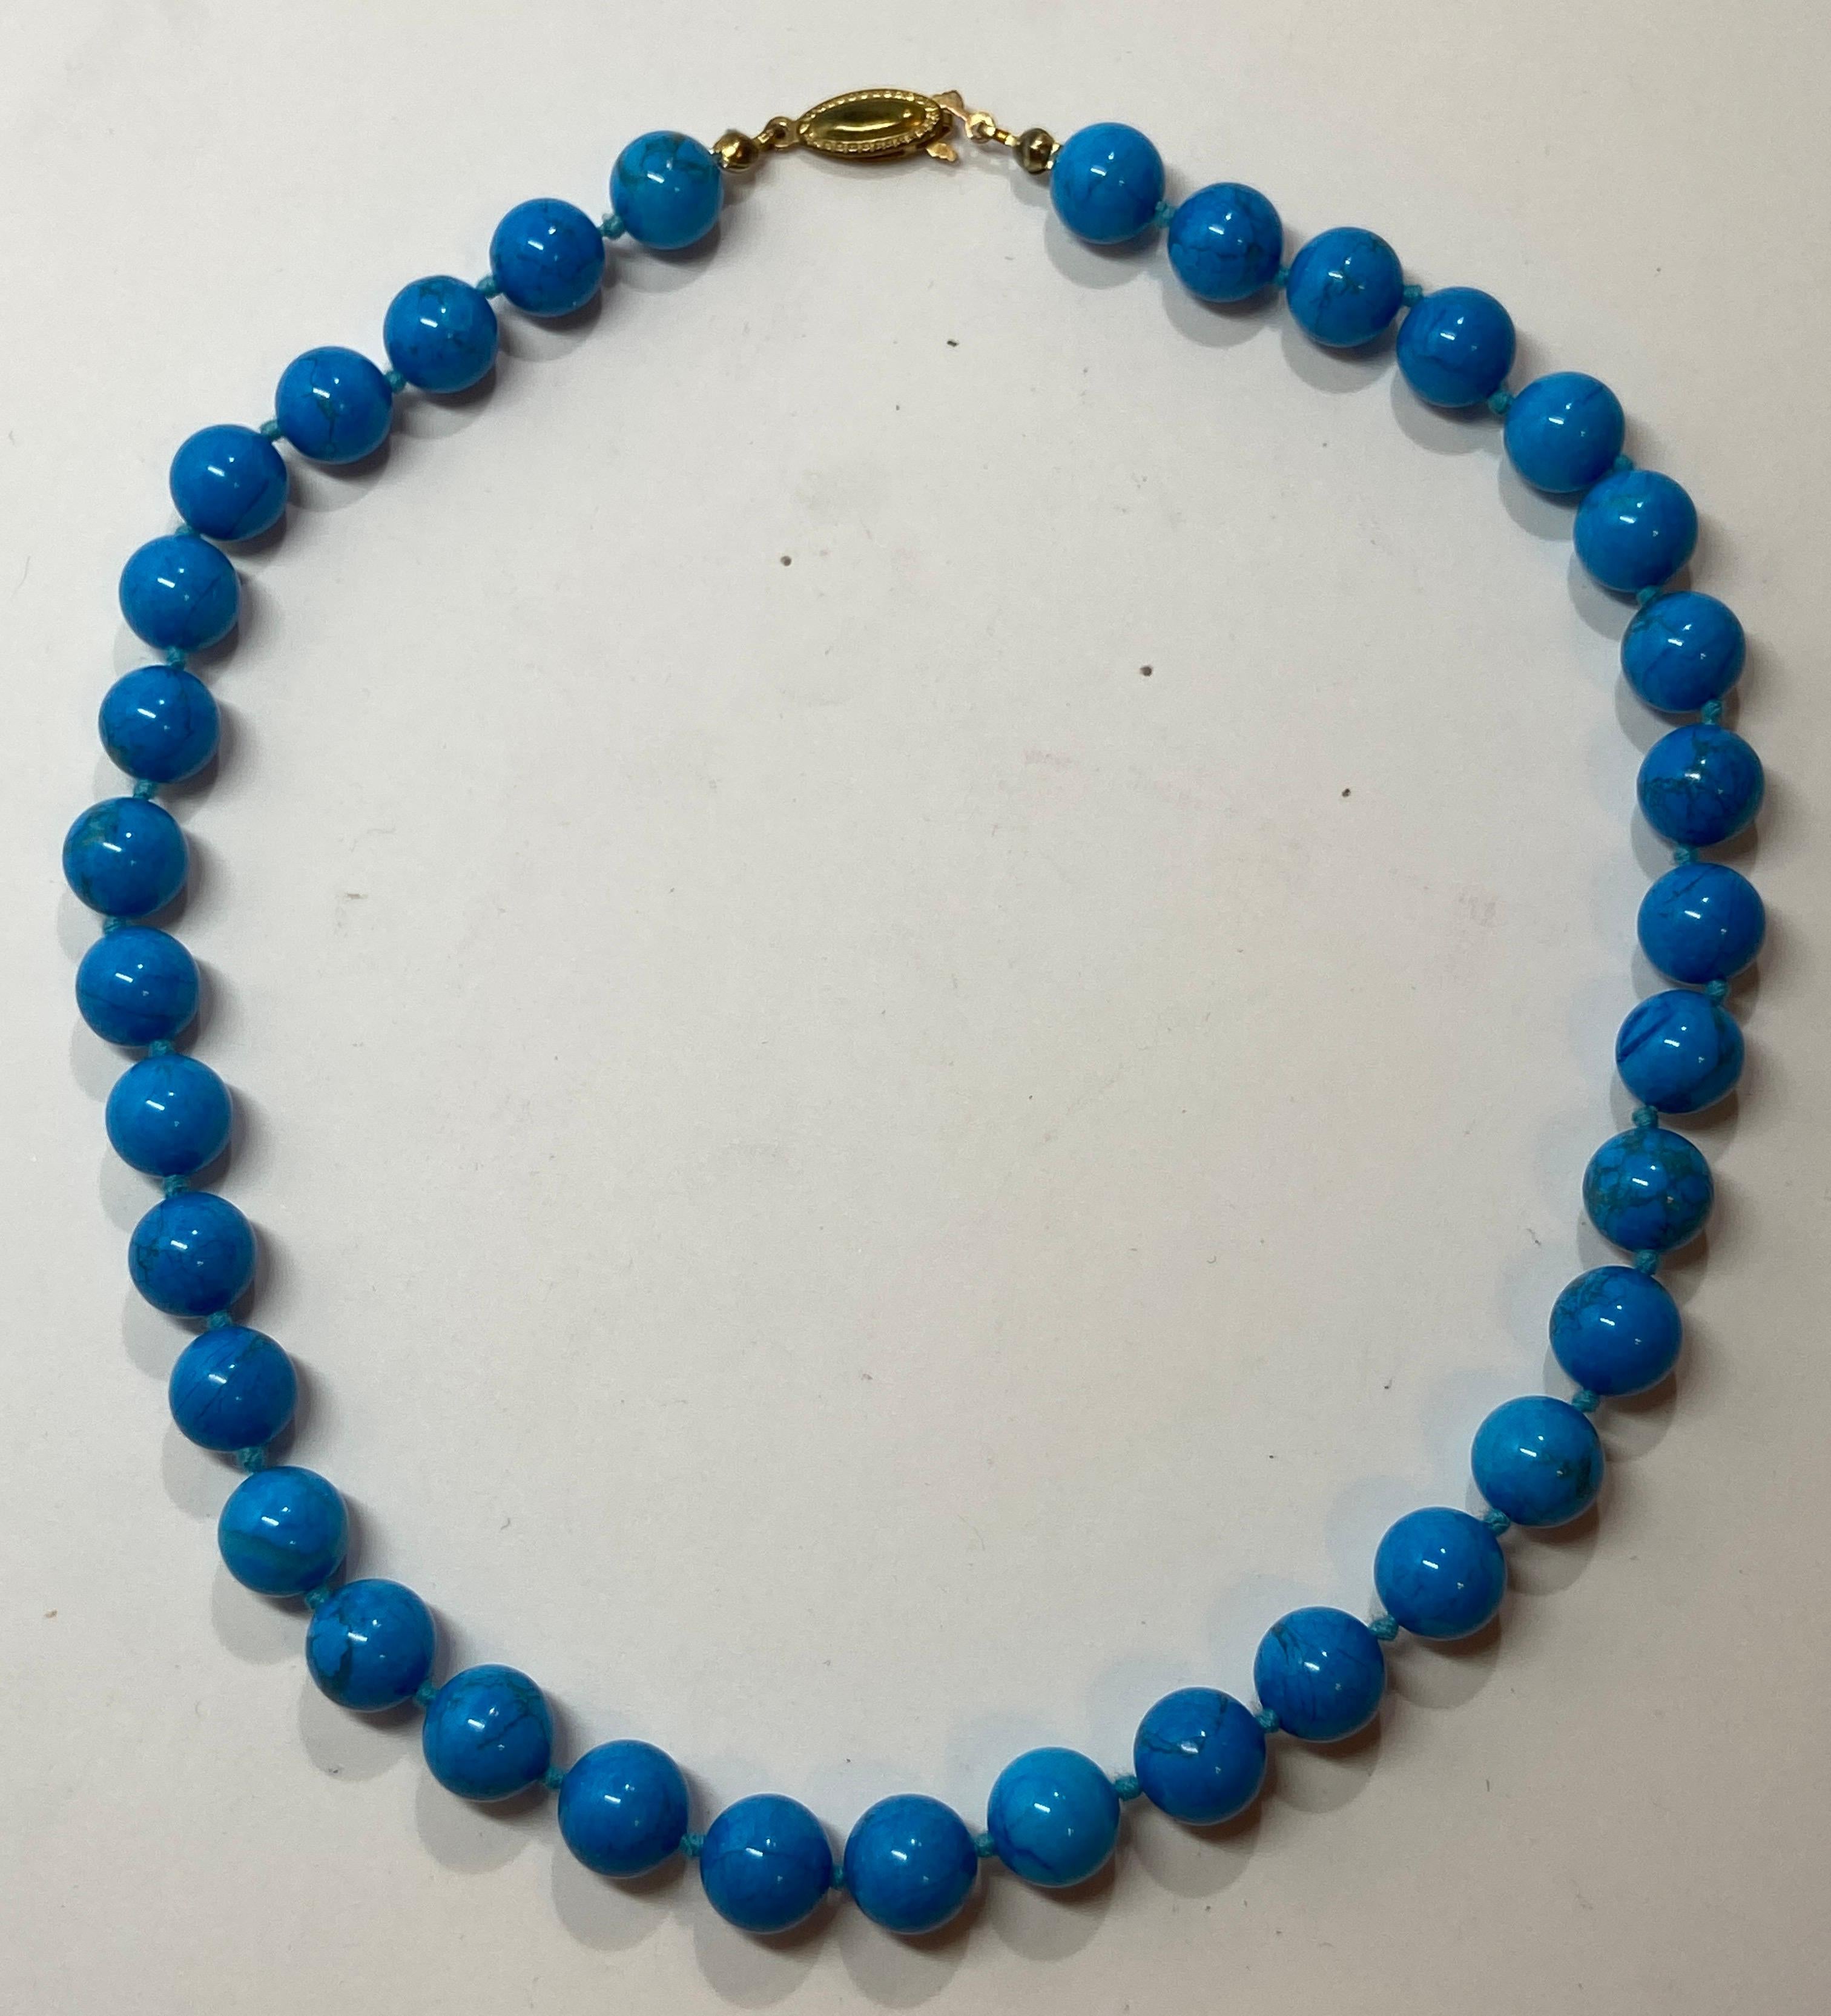      This wonderful choker, made with Howlite stones in turquoise color is hand-knotted and finished with a gold hardware clasp. Believed to help relieve stress, as well as to help open up memories if your previous lives, this elegant necklace sit